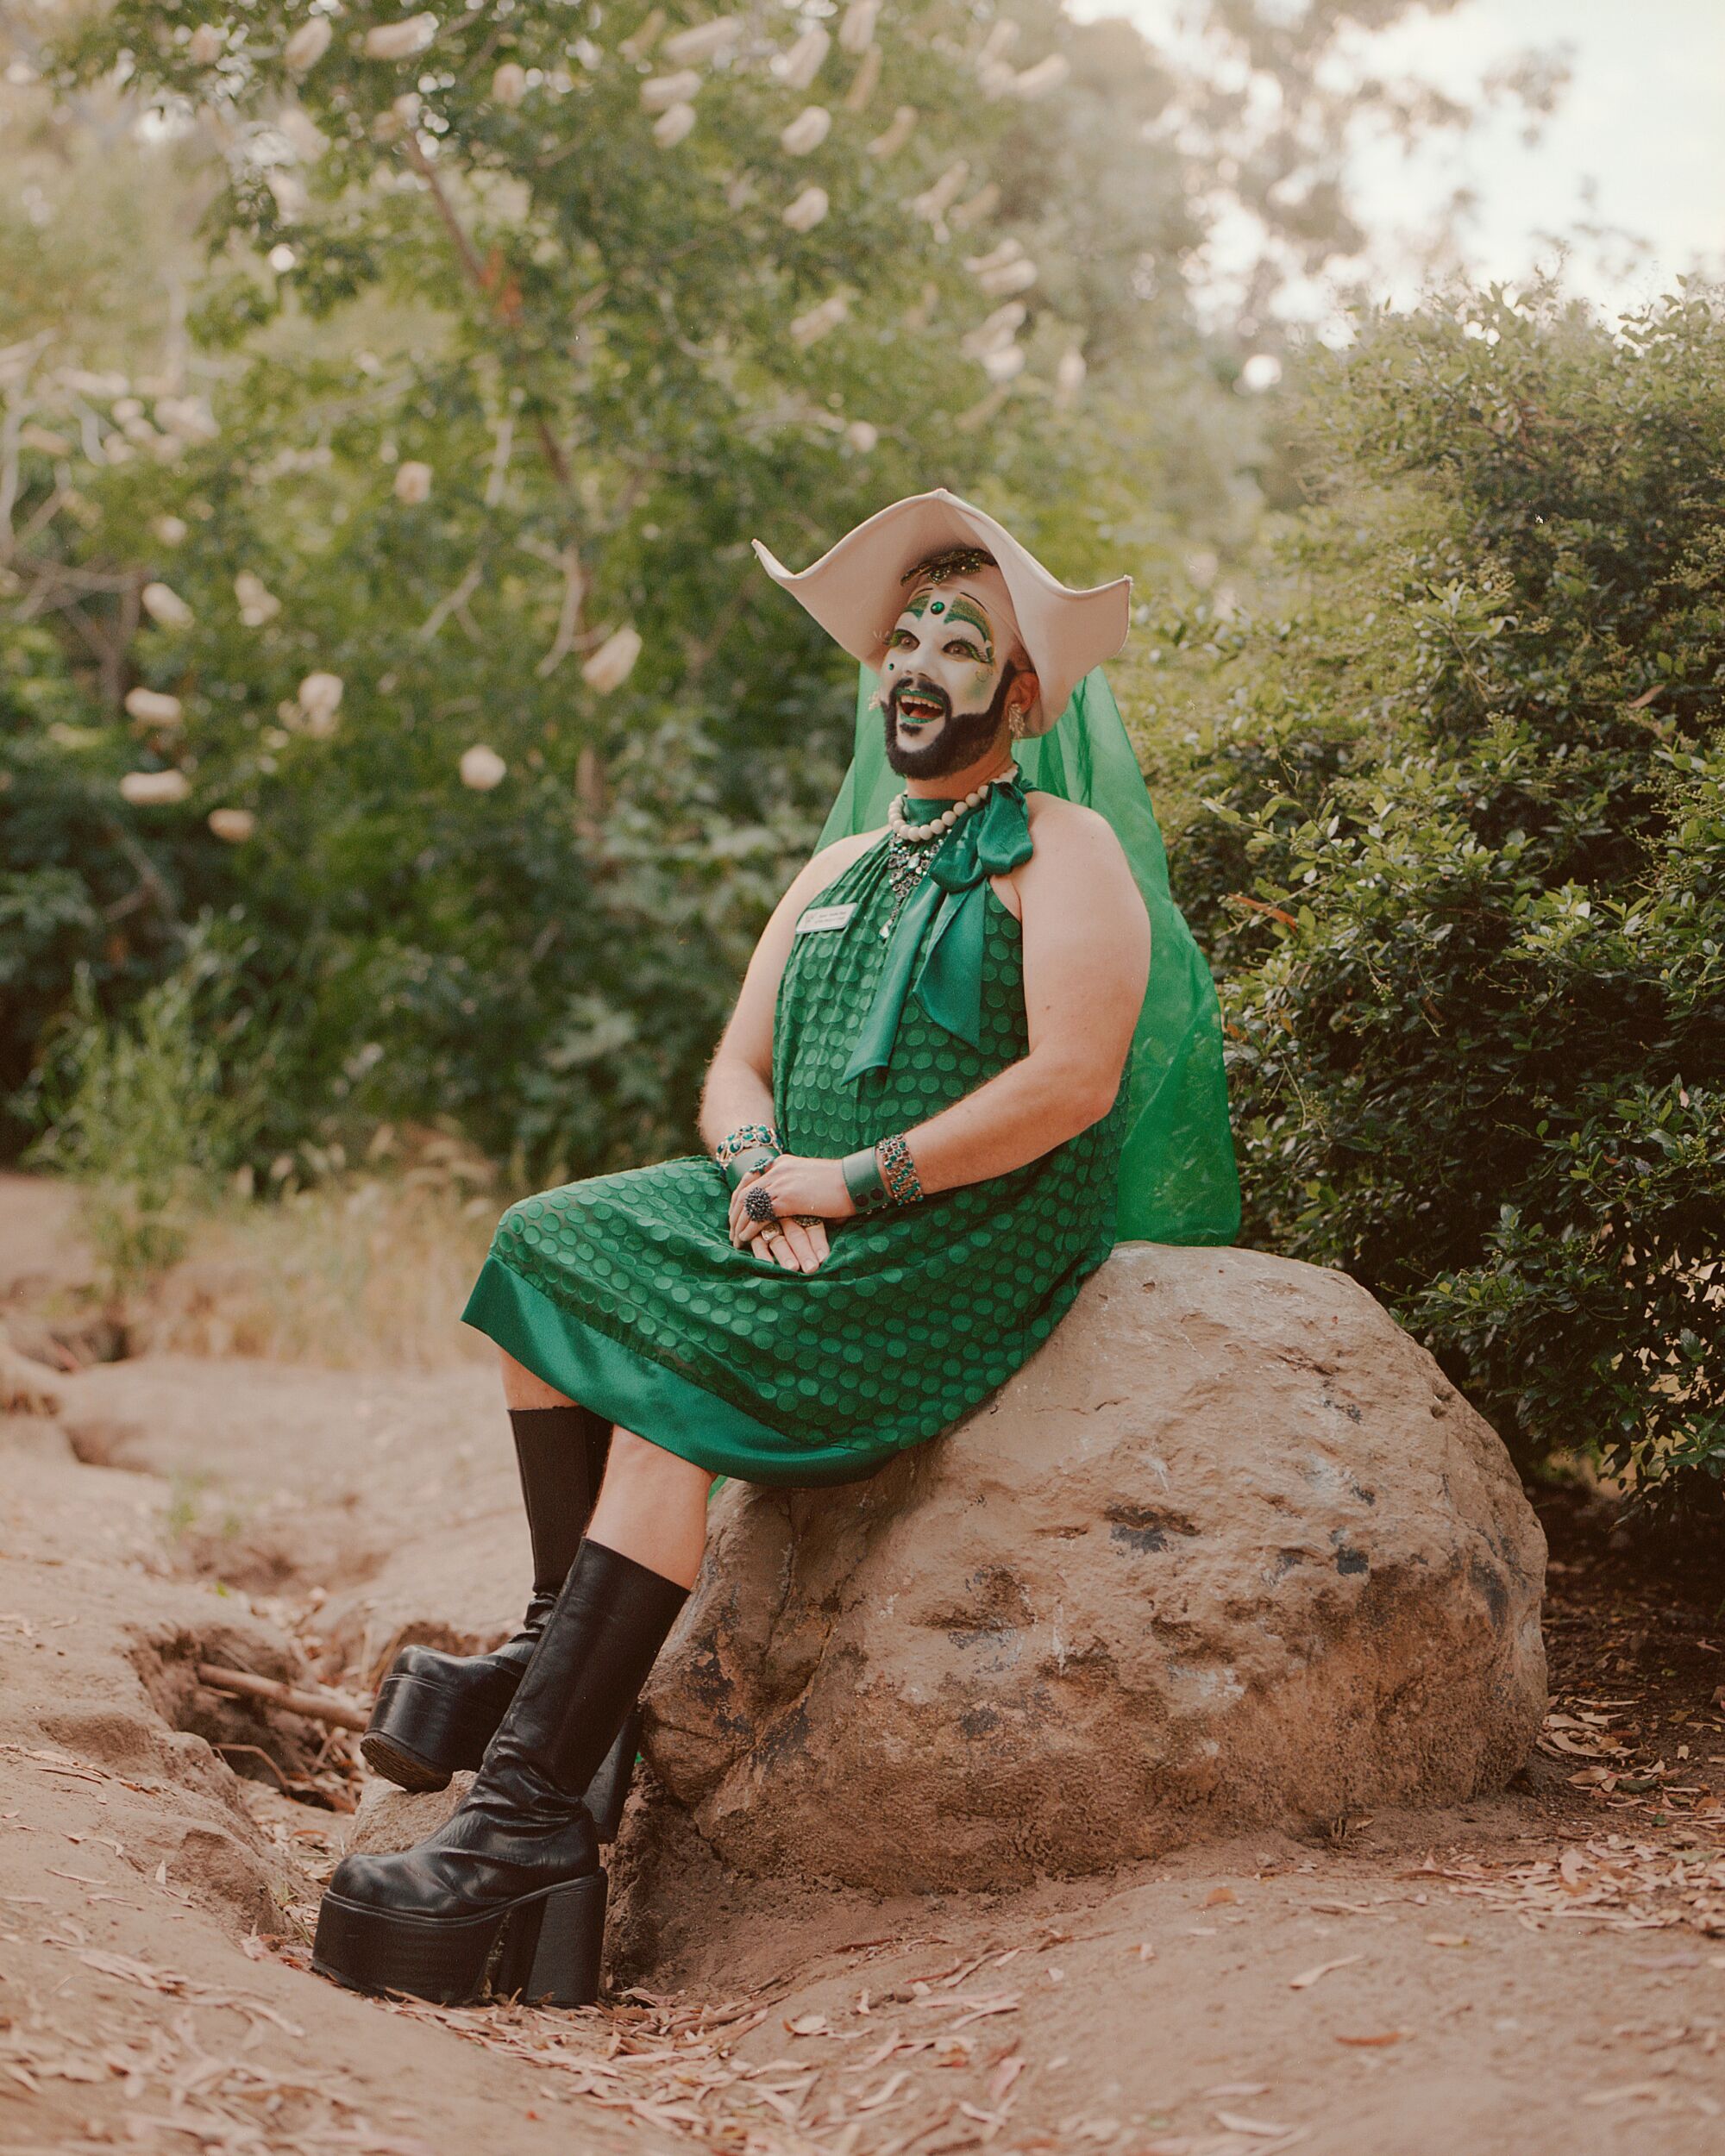 A drag nun in a green dress and boots sits on an outdoor rock.